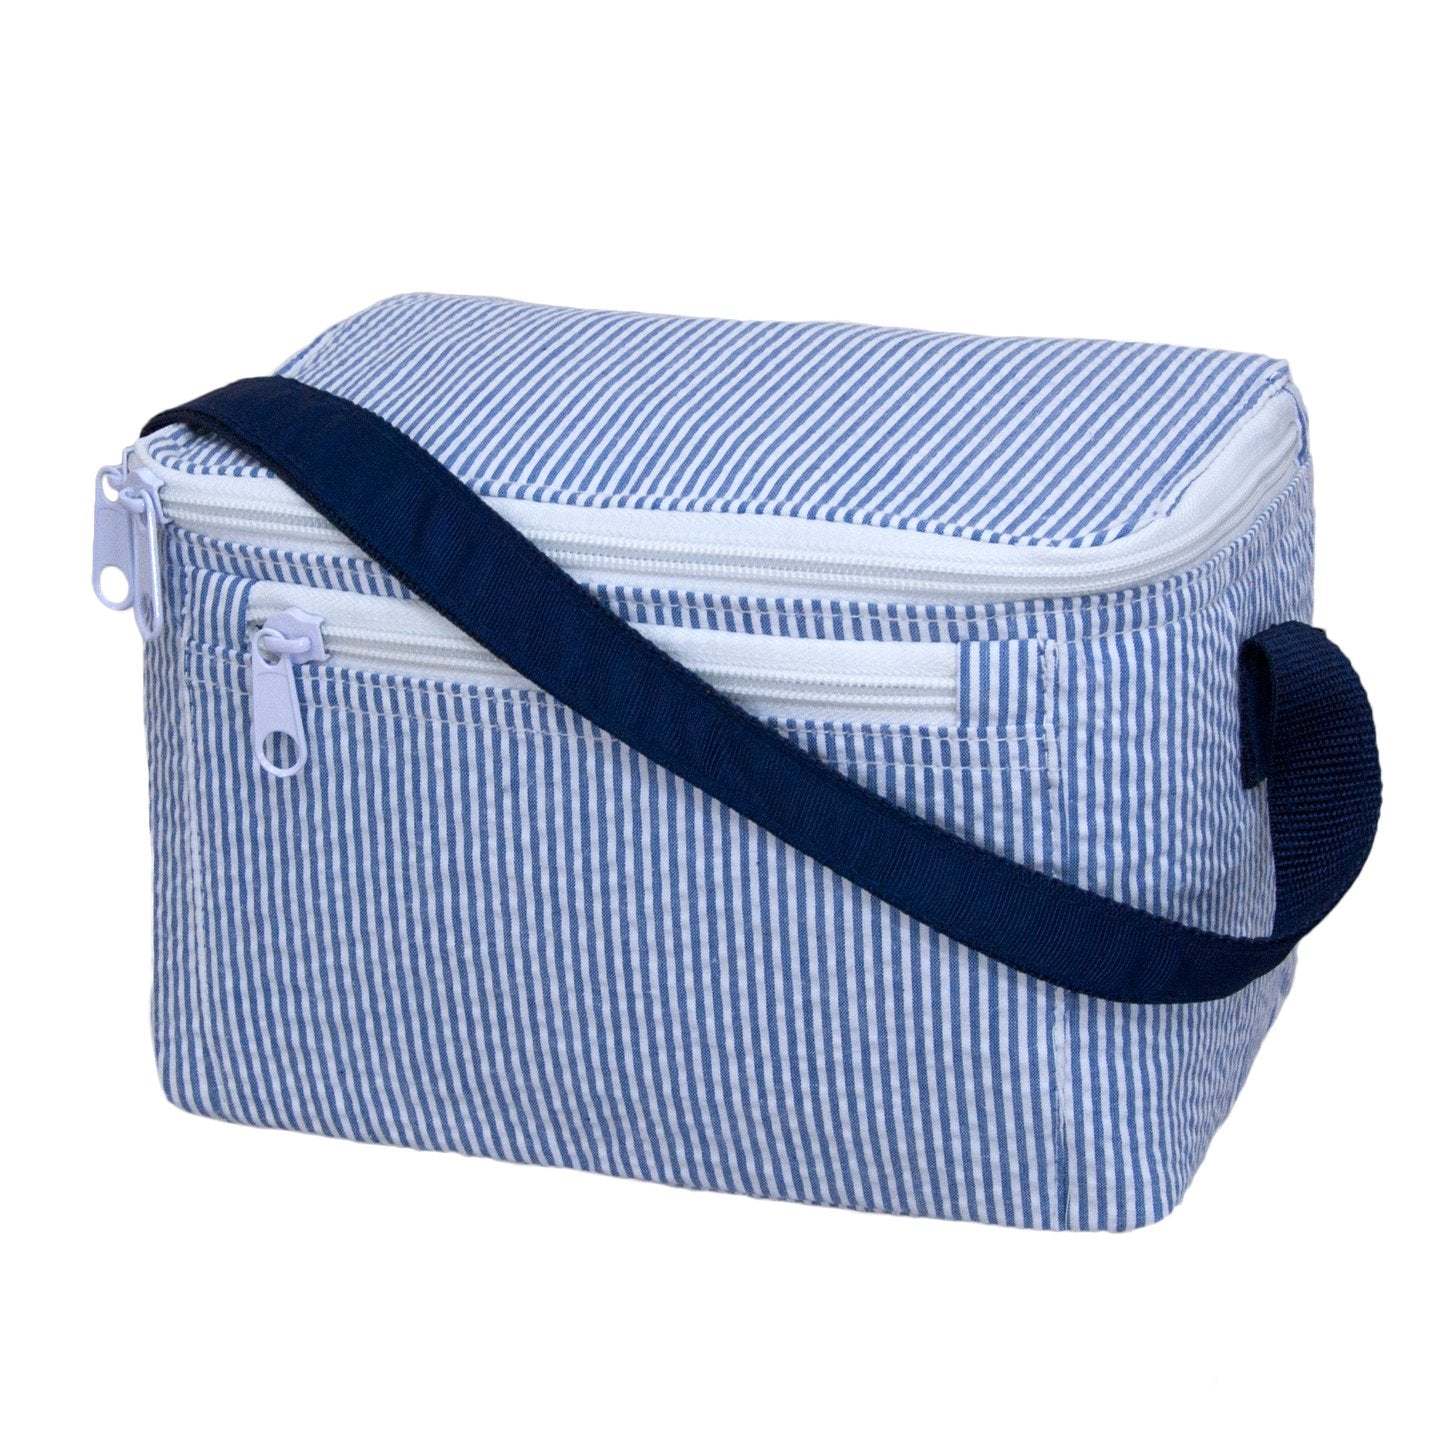 Lunch Box, Assorted Colors